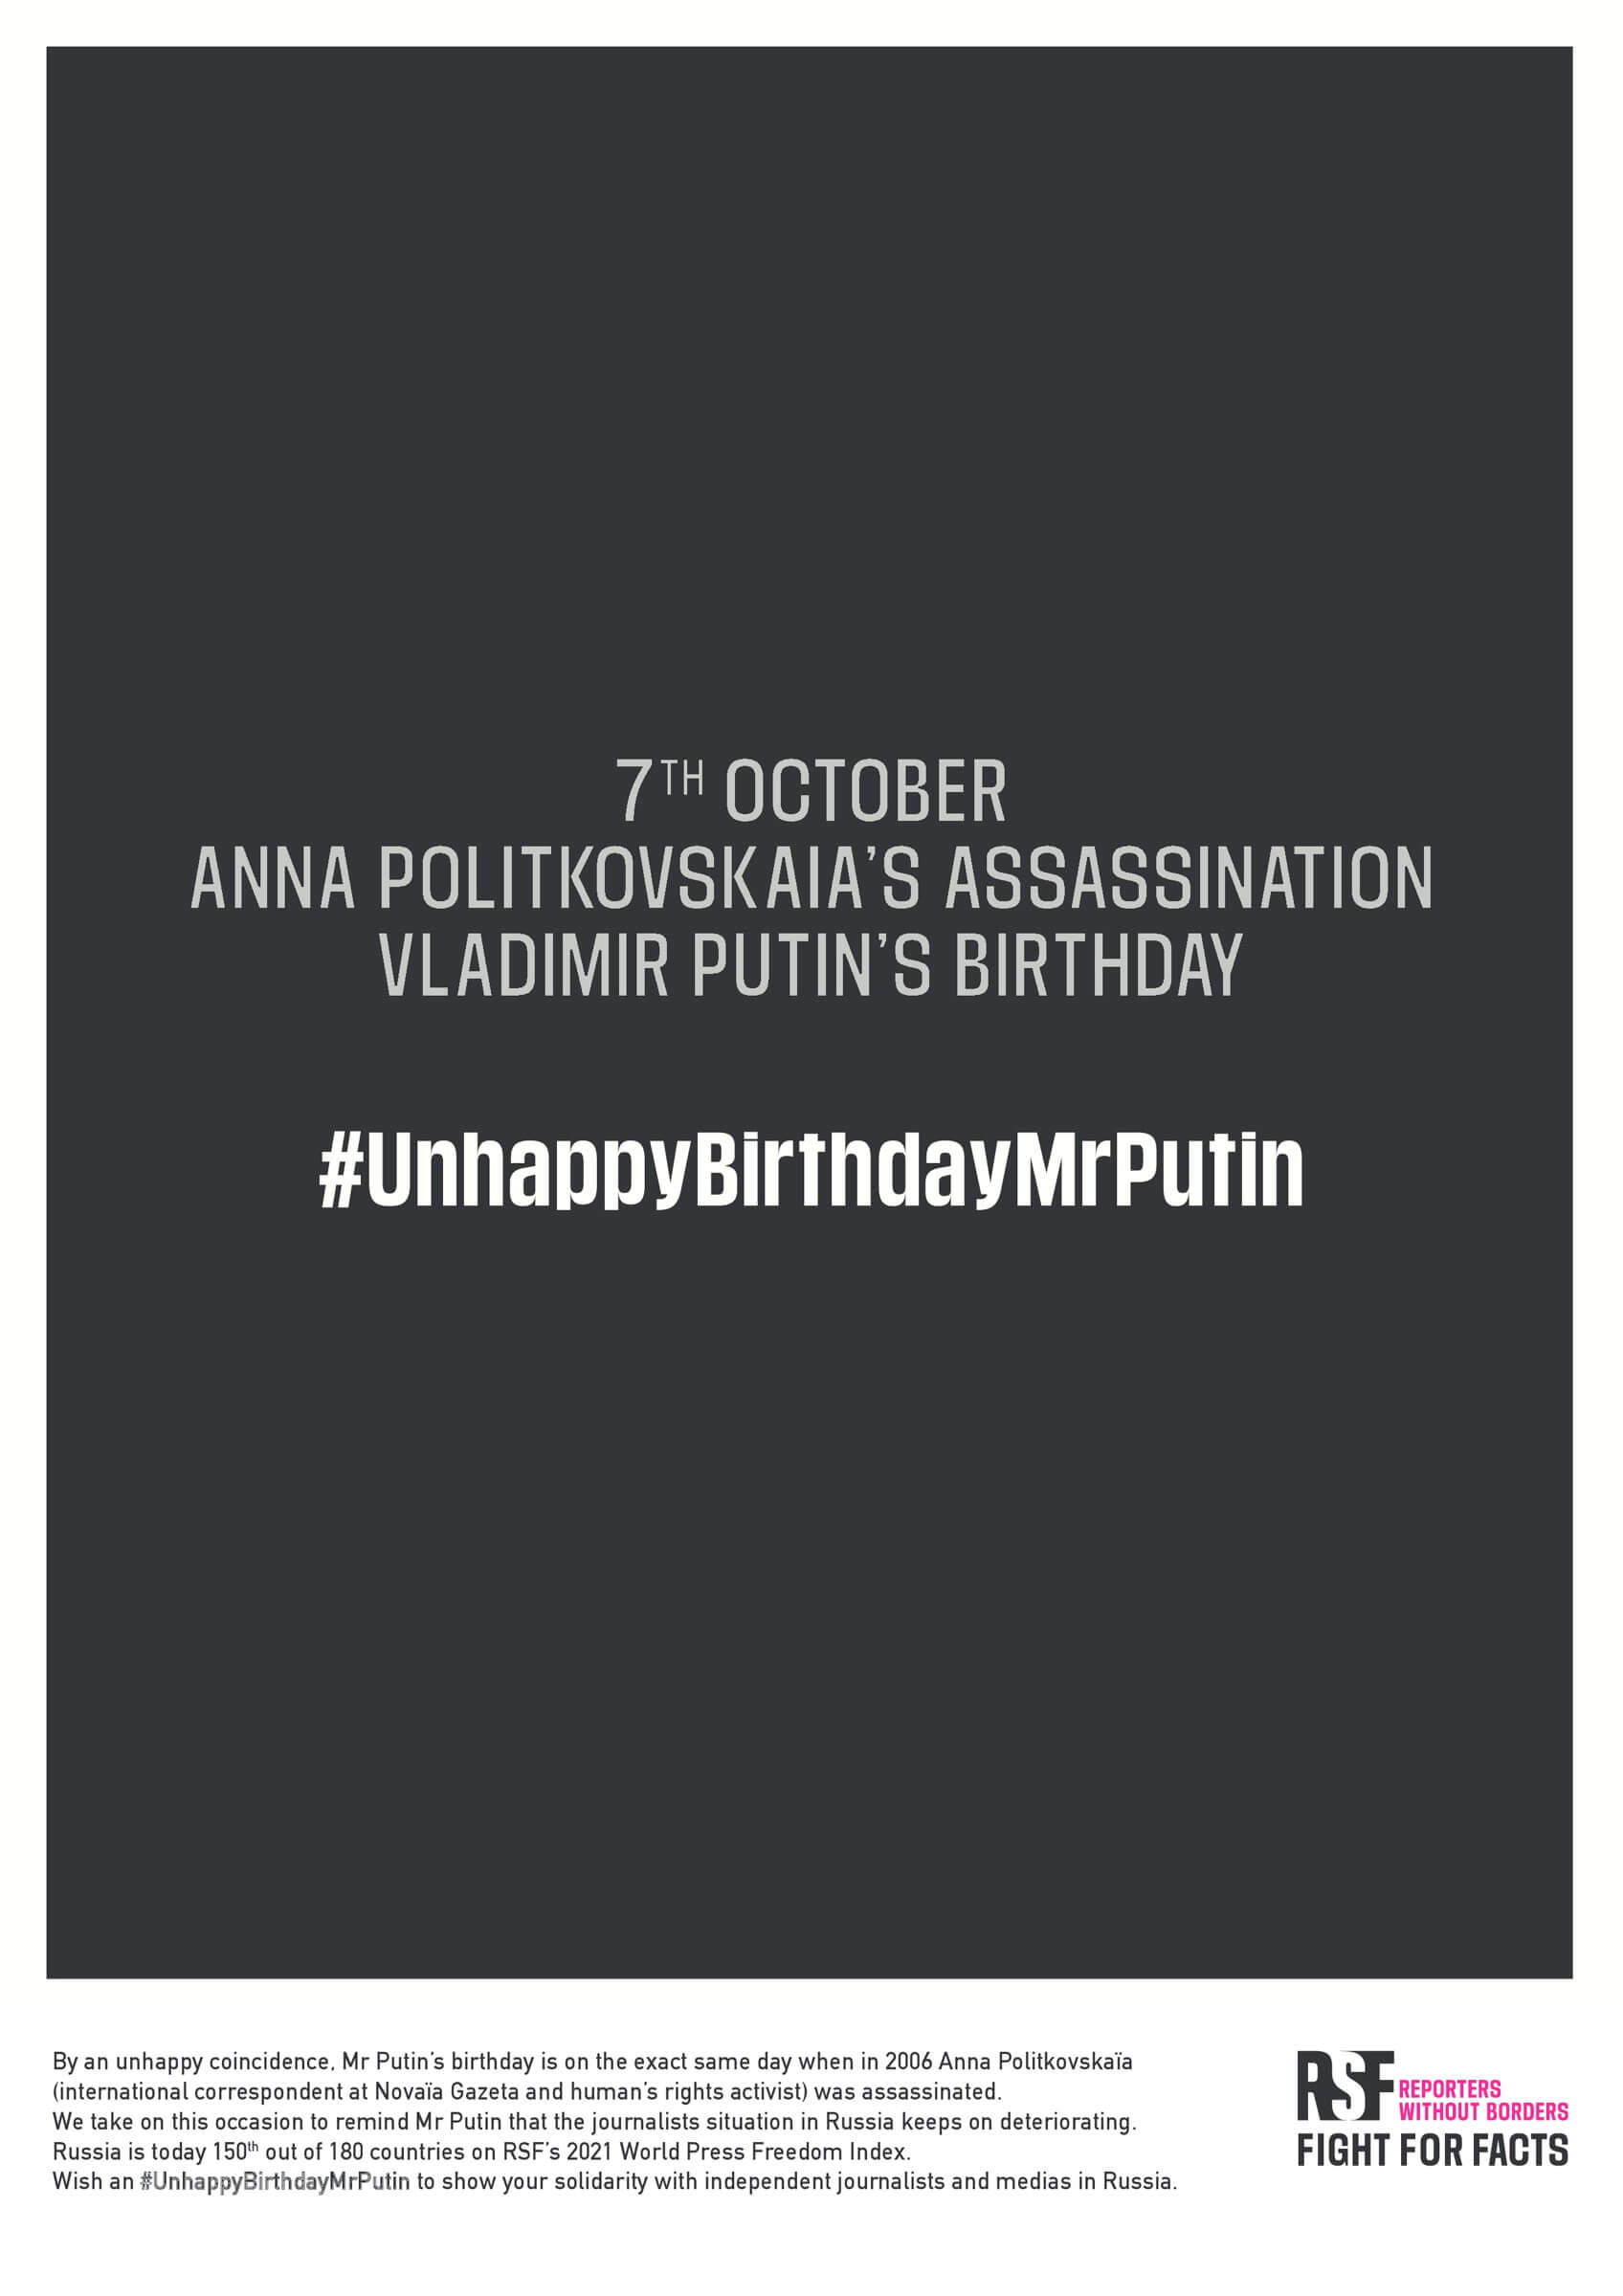 Reporters Without Borders (RSF): #UnhappyBirthdayMrPutin